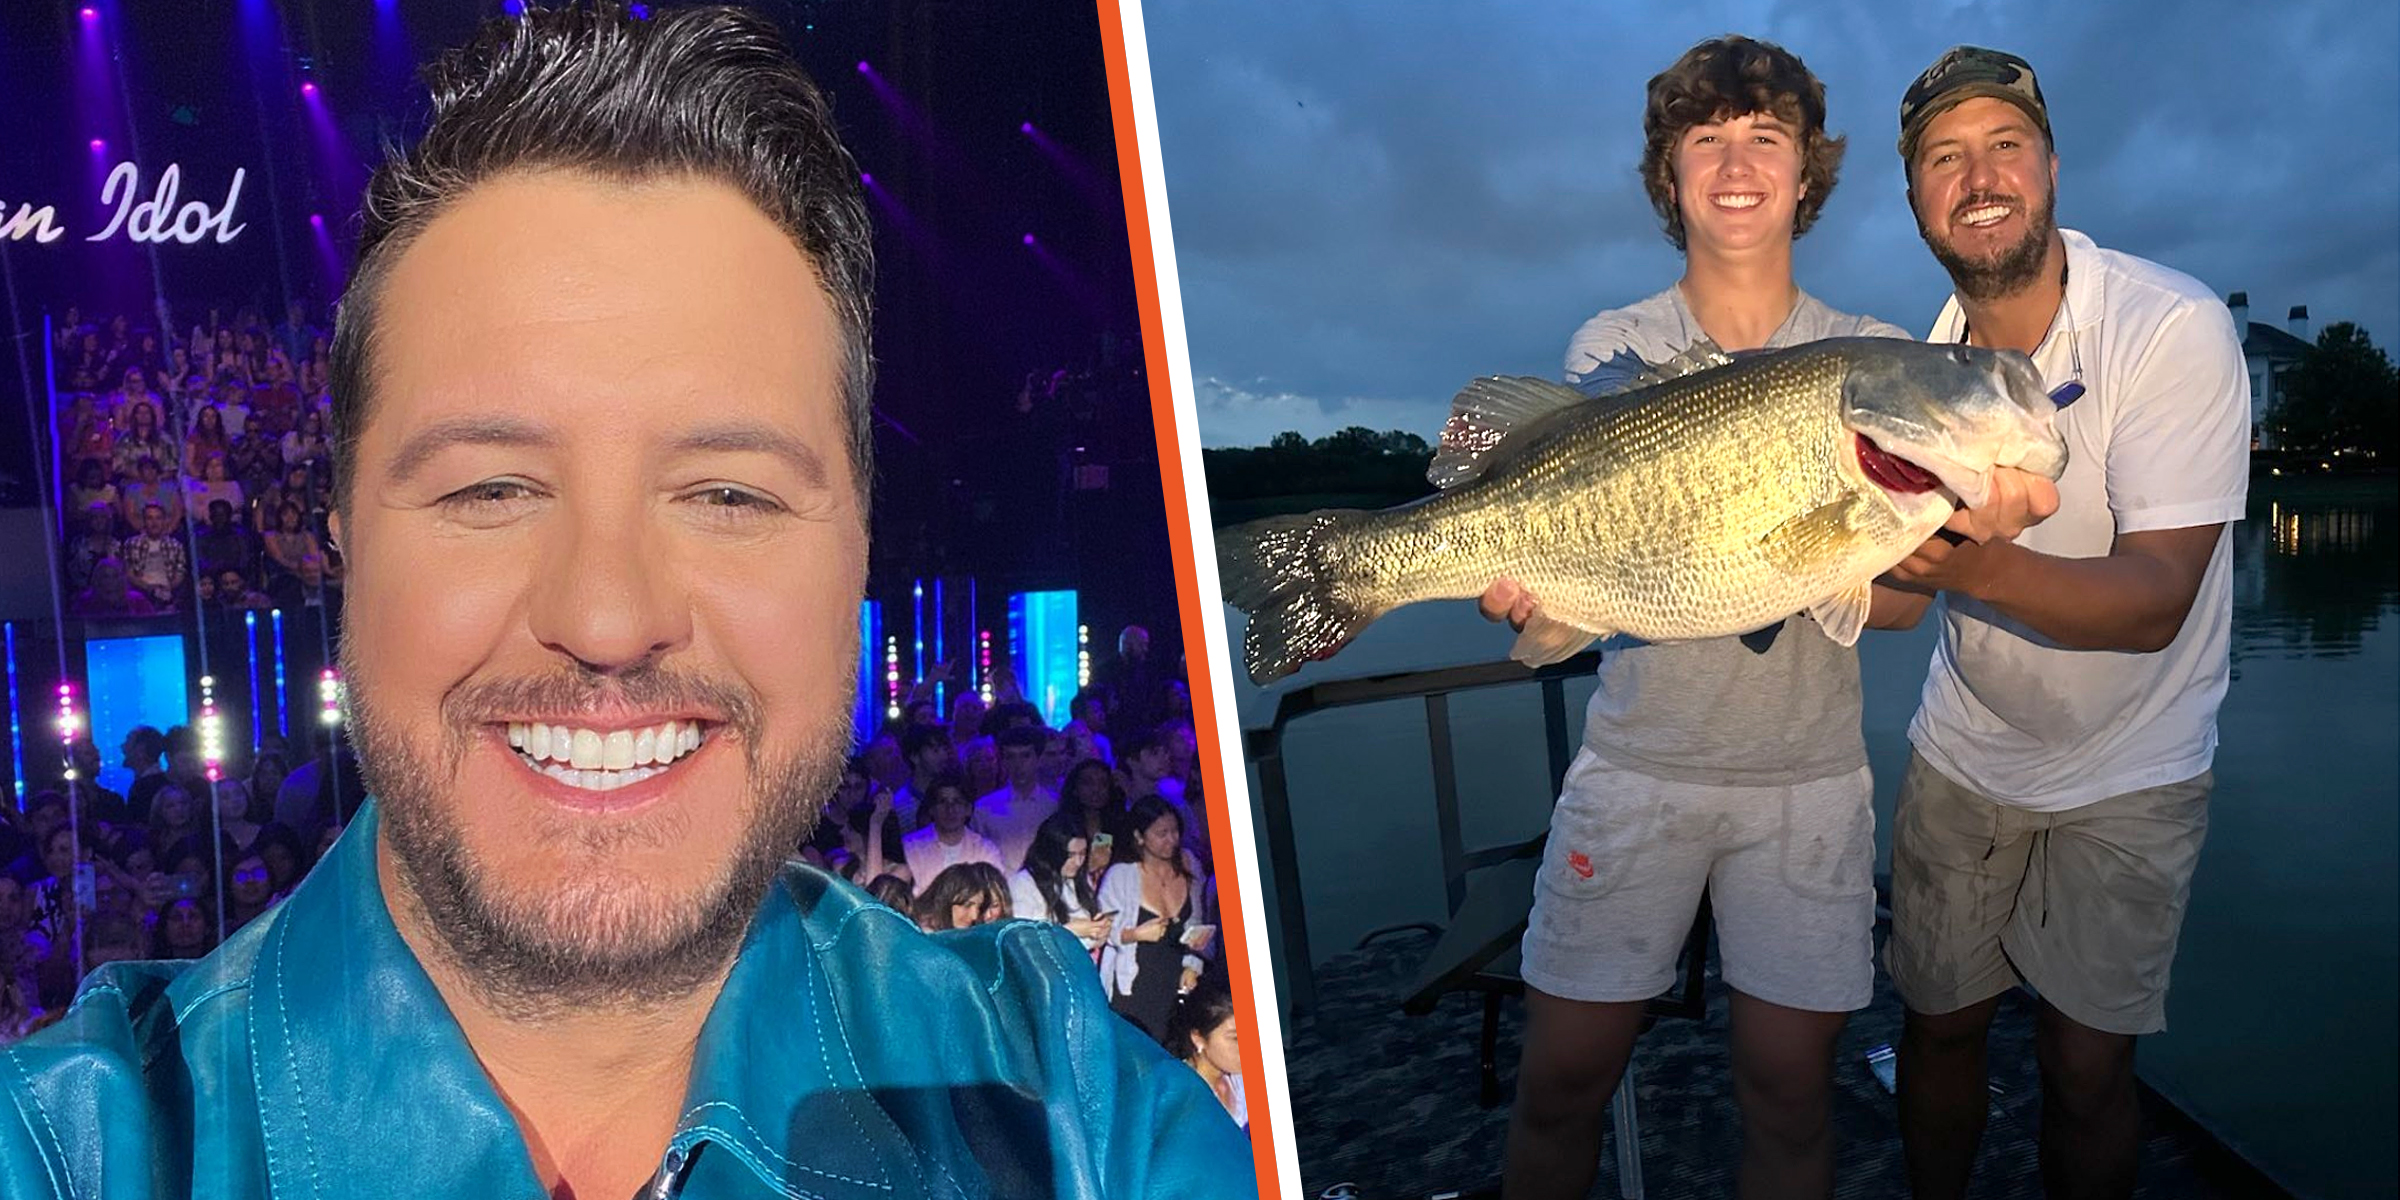 Luke Bryan's Fans Notice His Son BO Looks Just like Him in a Rare Photo